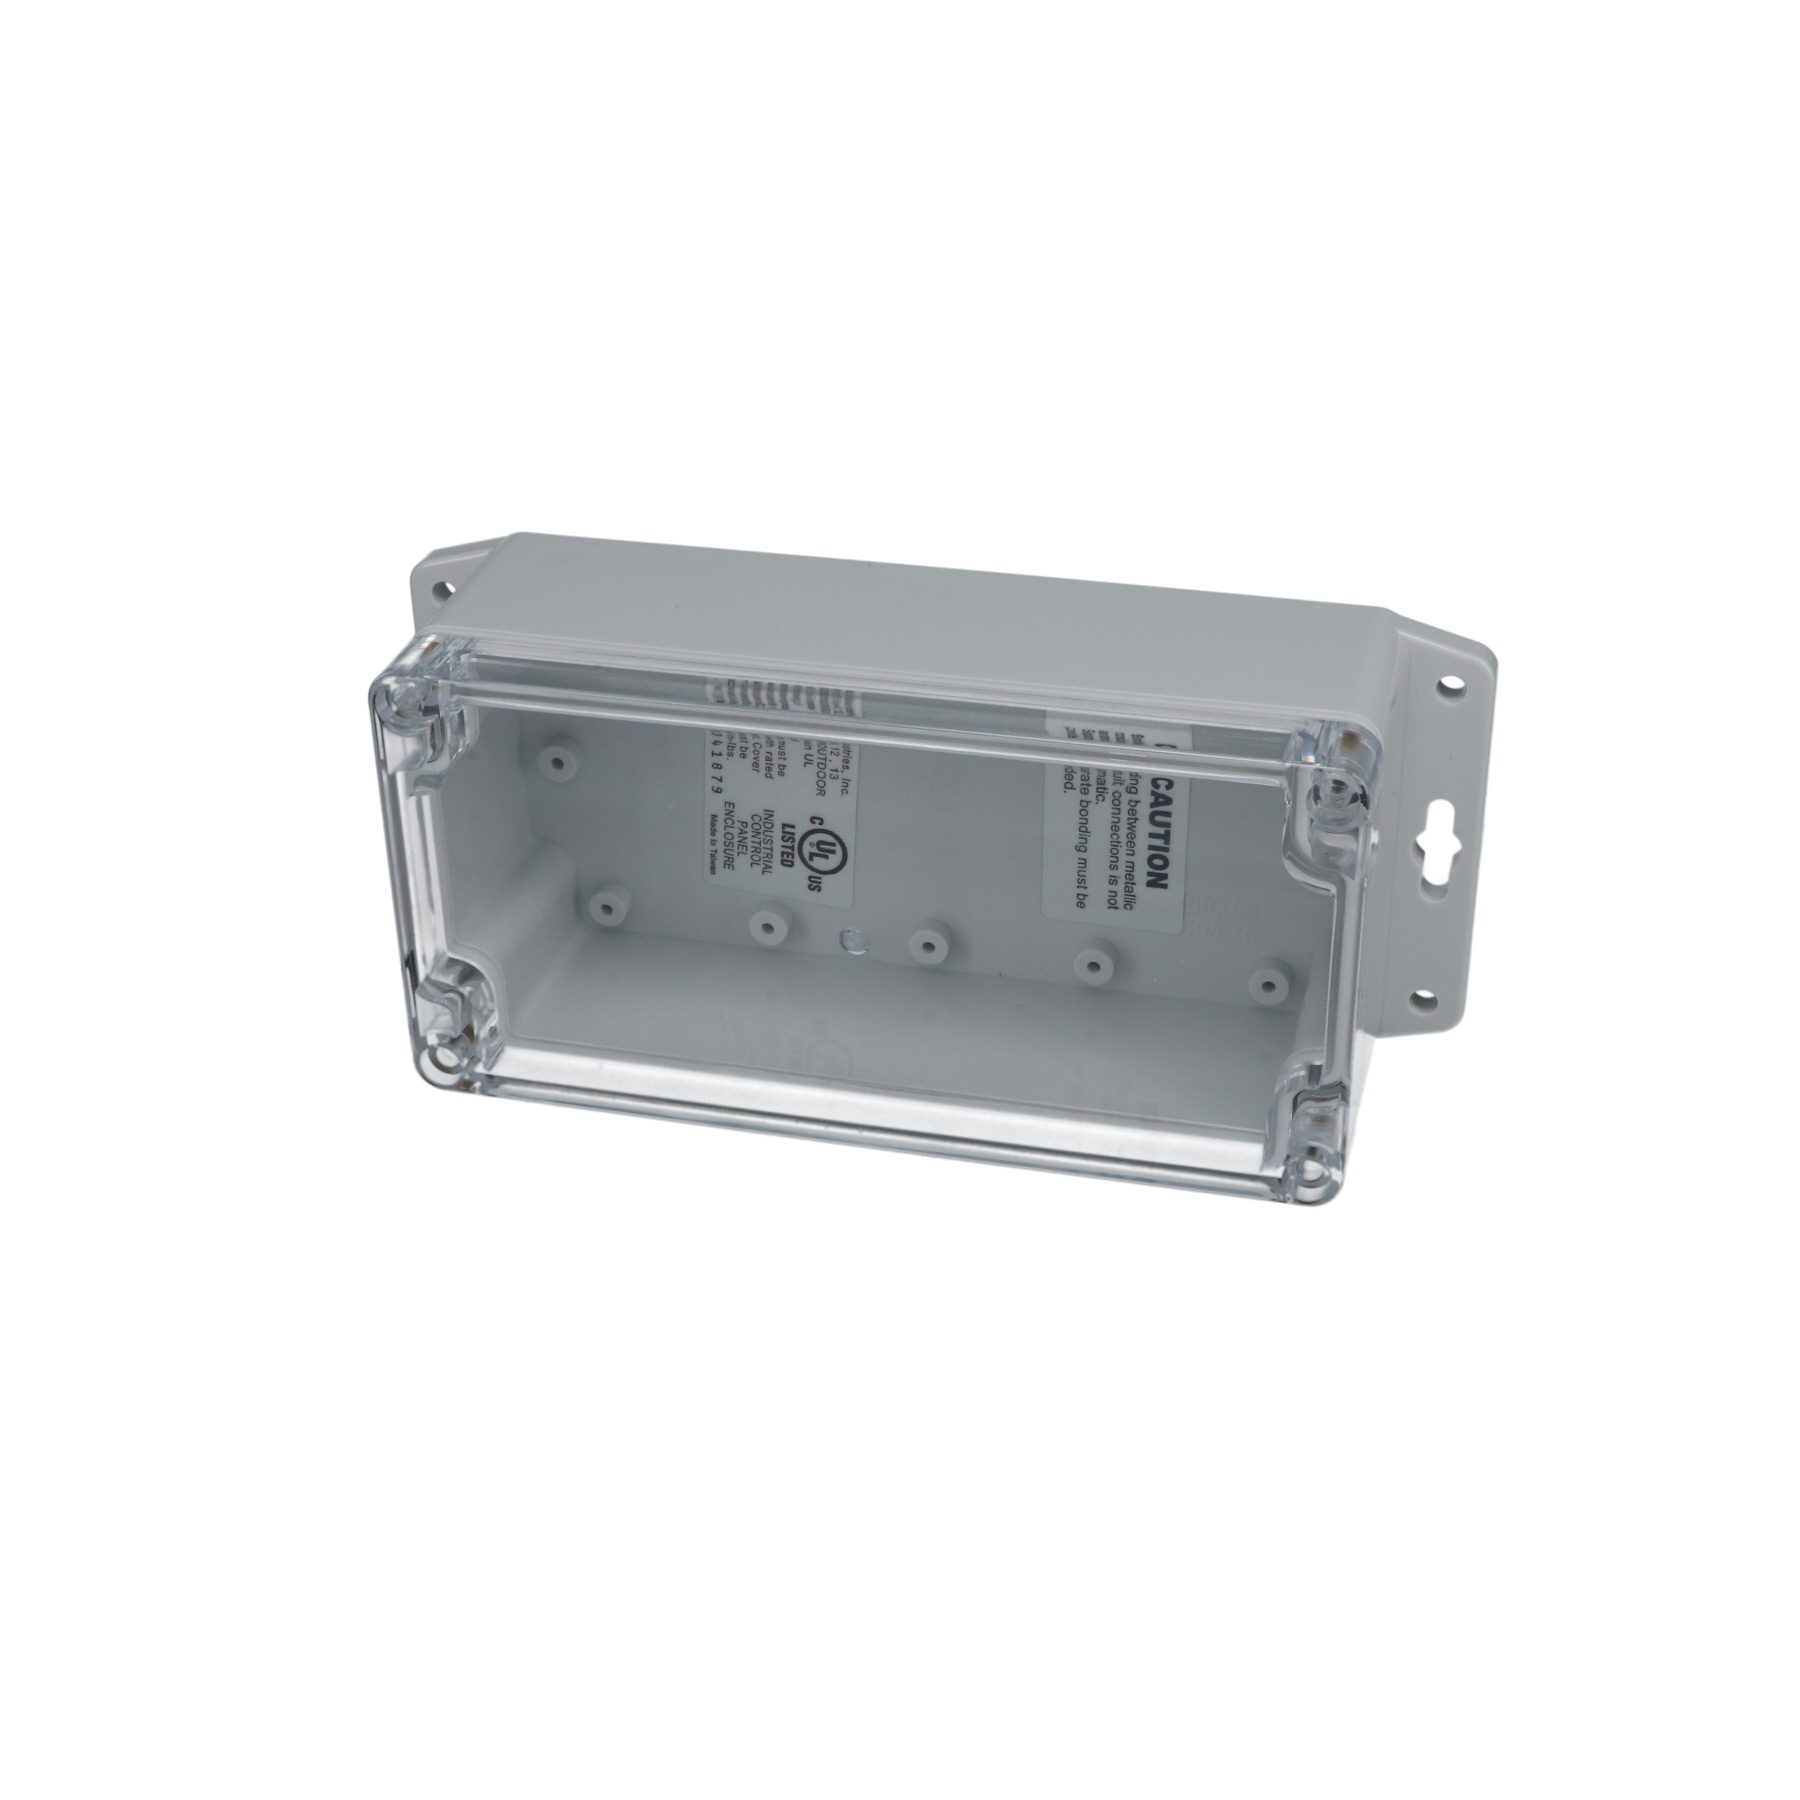 IP65 NEMA 4X Box with Clear Cover and Mounting Brackets PN-1332-CMB